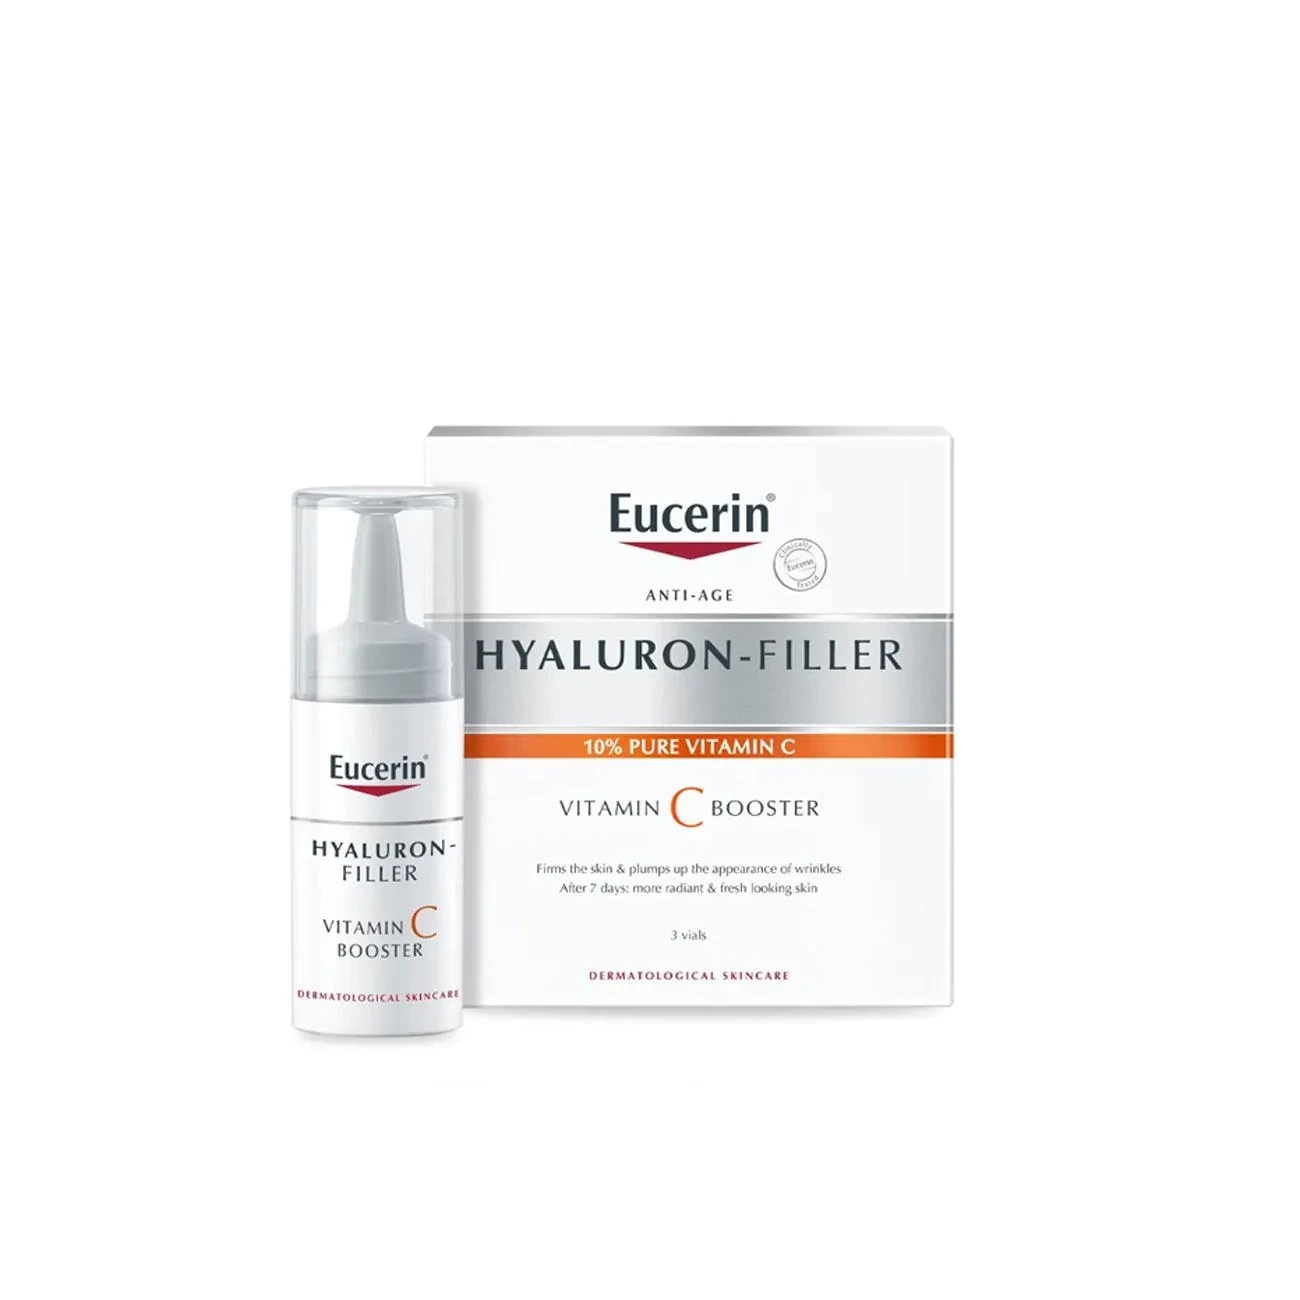 EUCERIN - Hyaluron-Filler 10% Pure Vitamin C Booster - Pack of 3 Vials 3x8ml